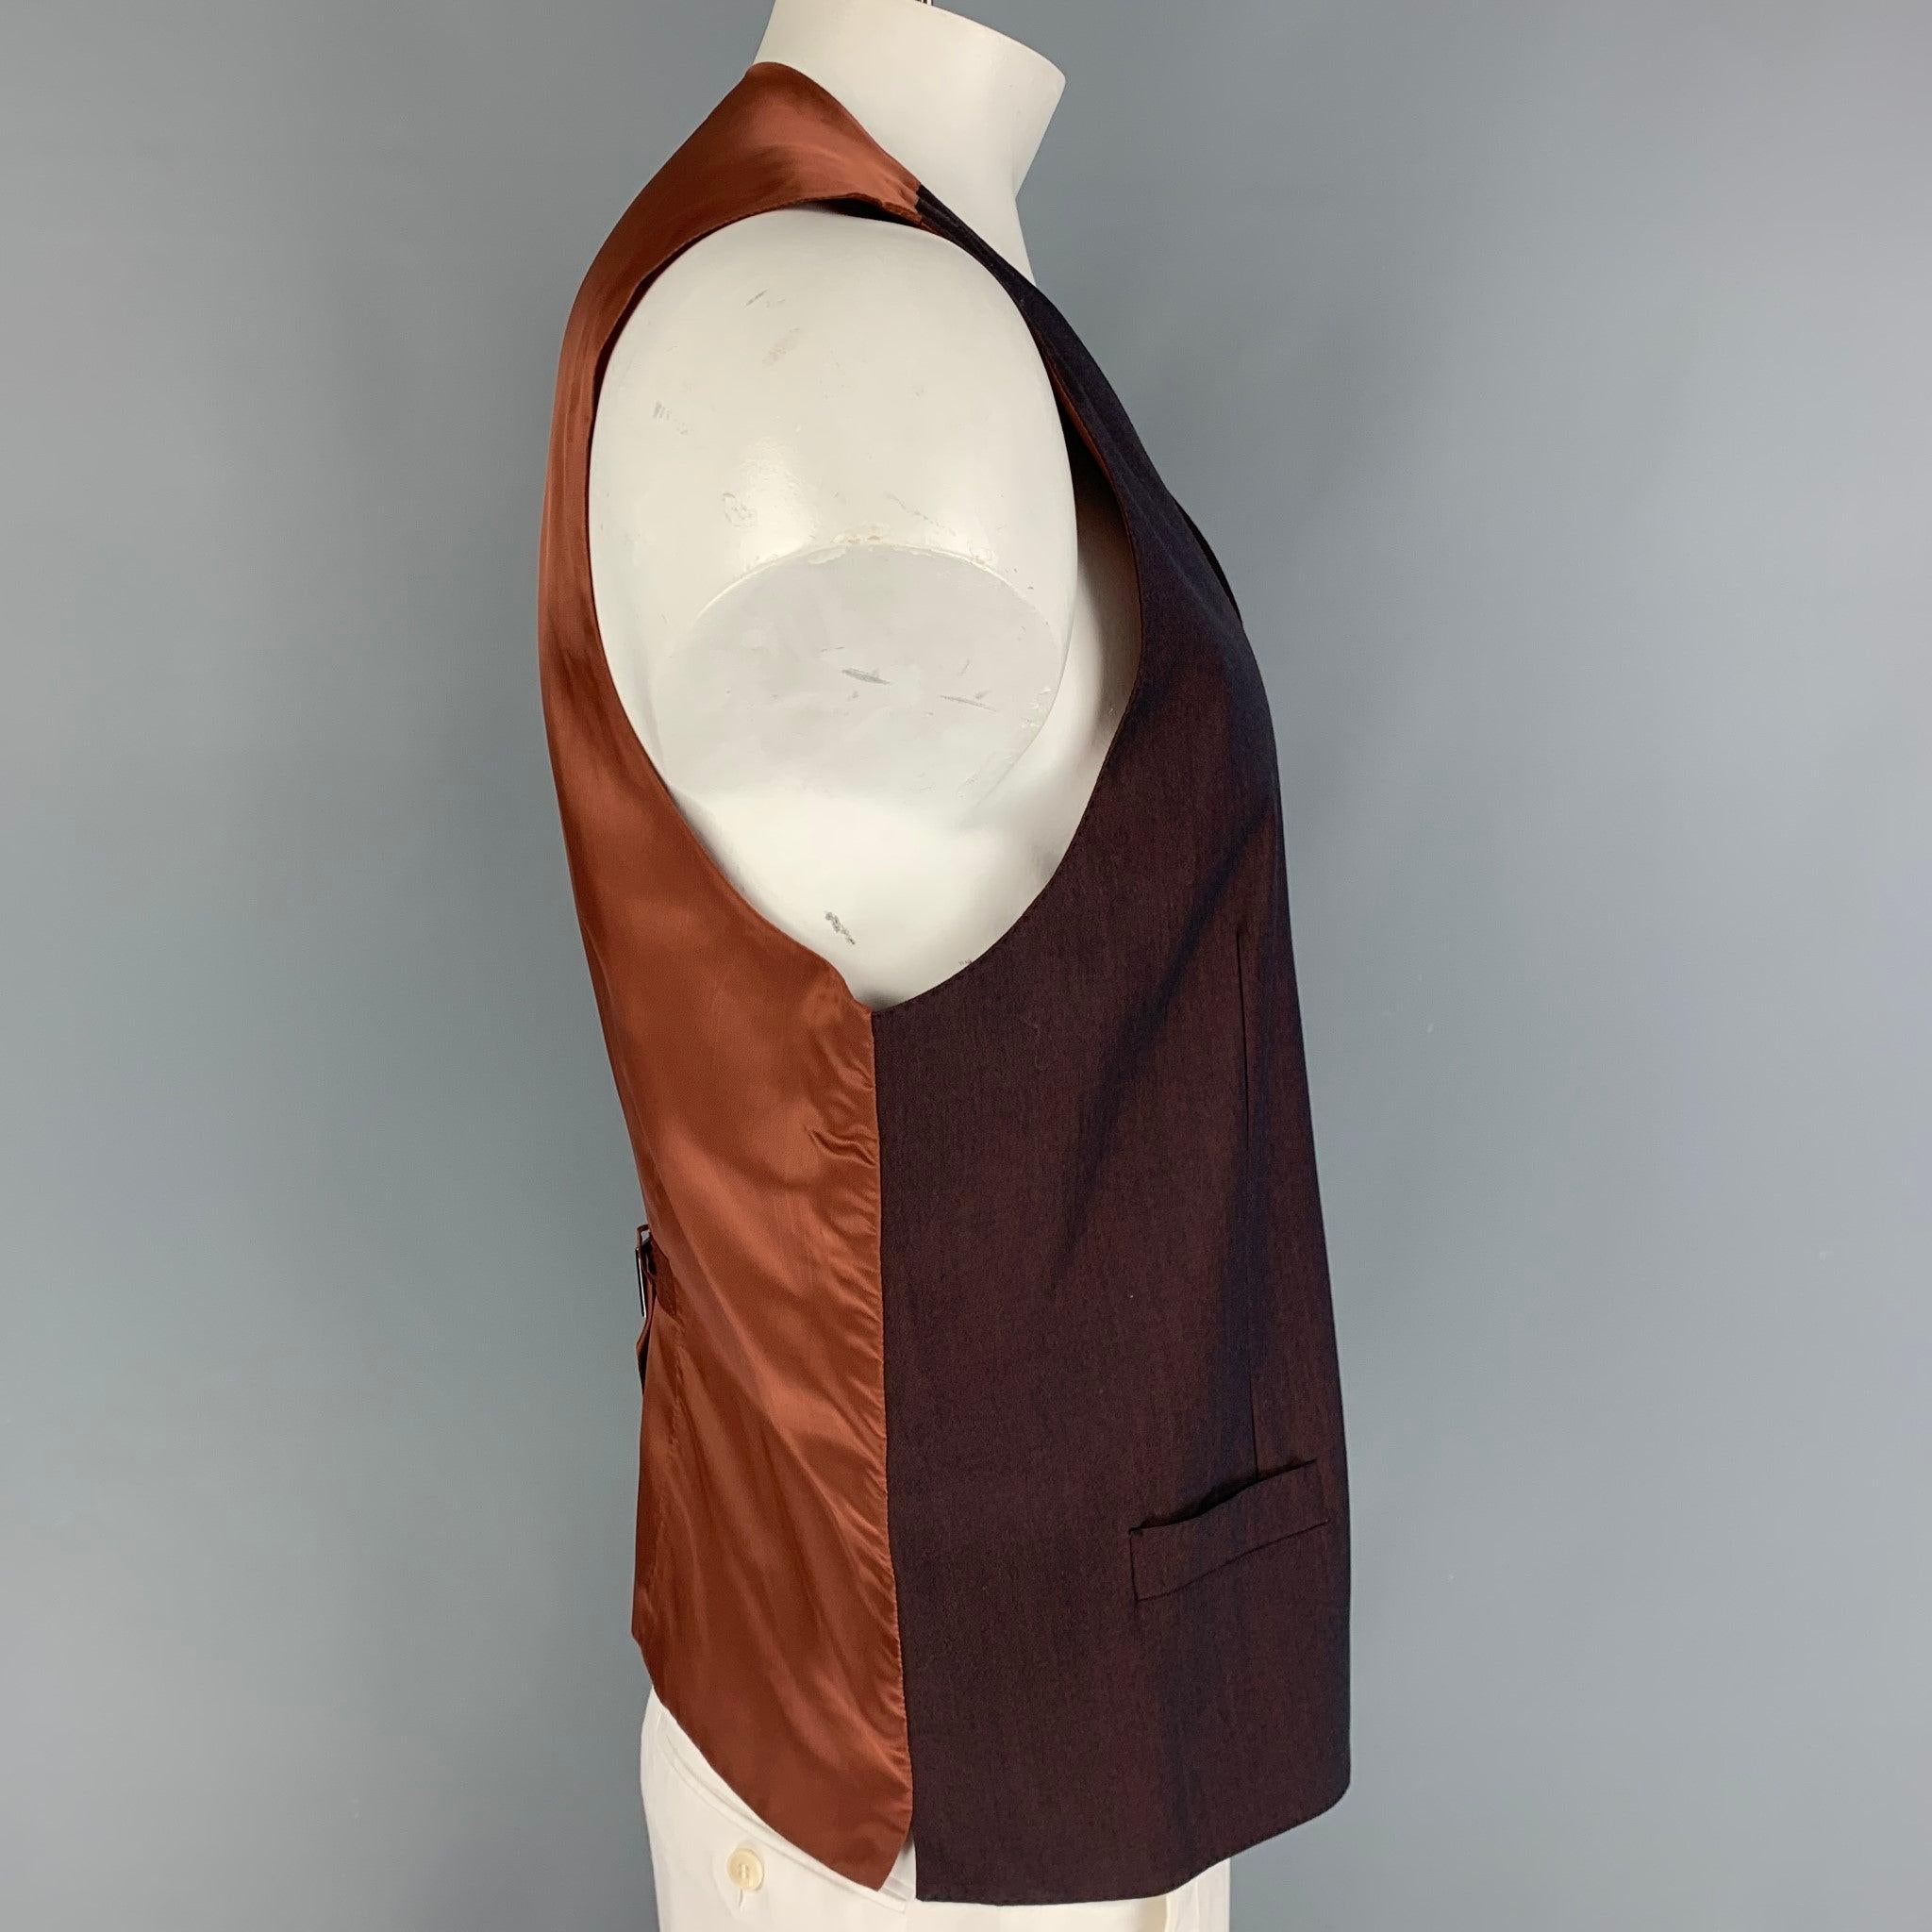 DOLCE & GABBANA dress vest comes in a brown wool fabric, full lined featuring V-neck, welt pockets, five buttons down closure, brown viscose fabric back and adjustable sliding belt. Made in Italy.Excellent Pre-Owned Condition.  

Marked:   no size